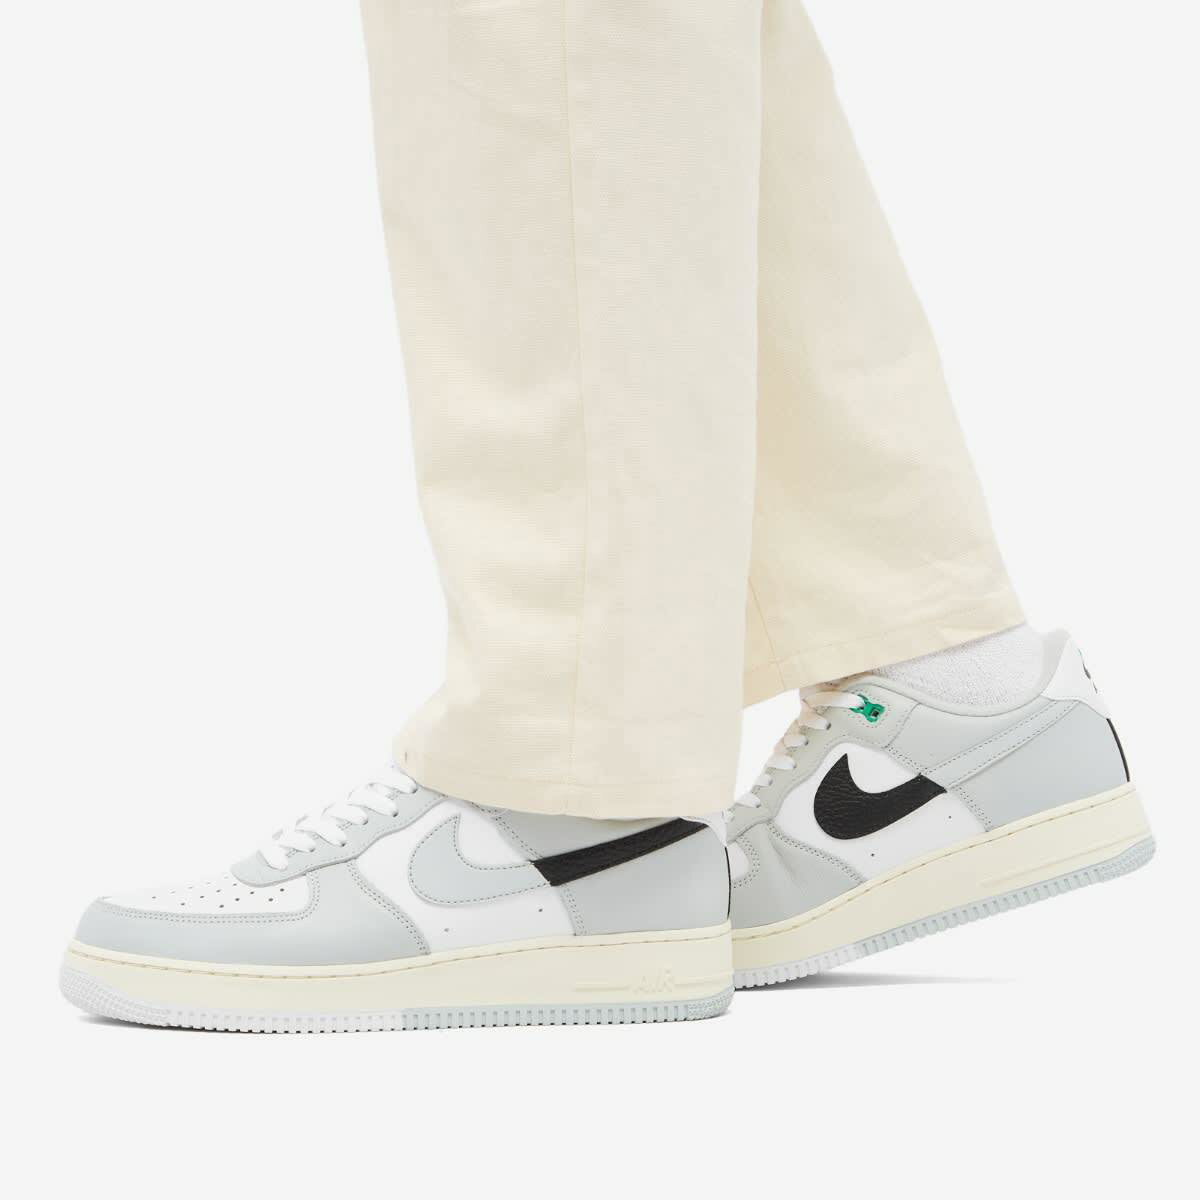 Nike Air Force 1 '07 Lv8 Low-top Sneakers In Light Silver Black & Light  Silver